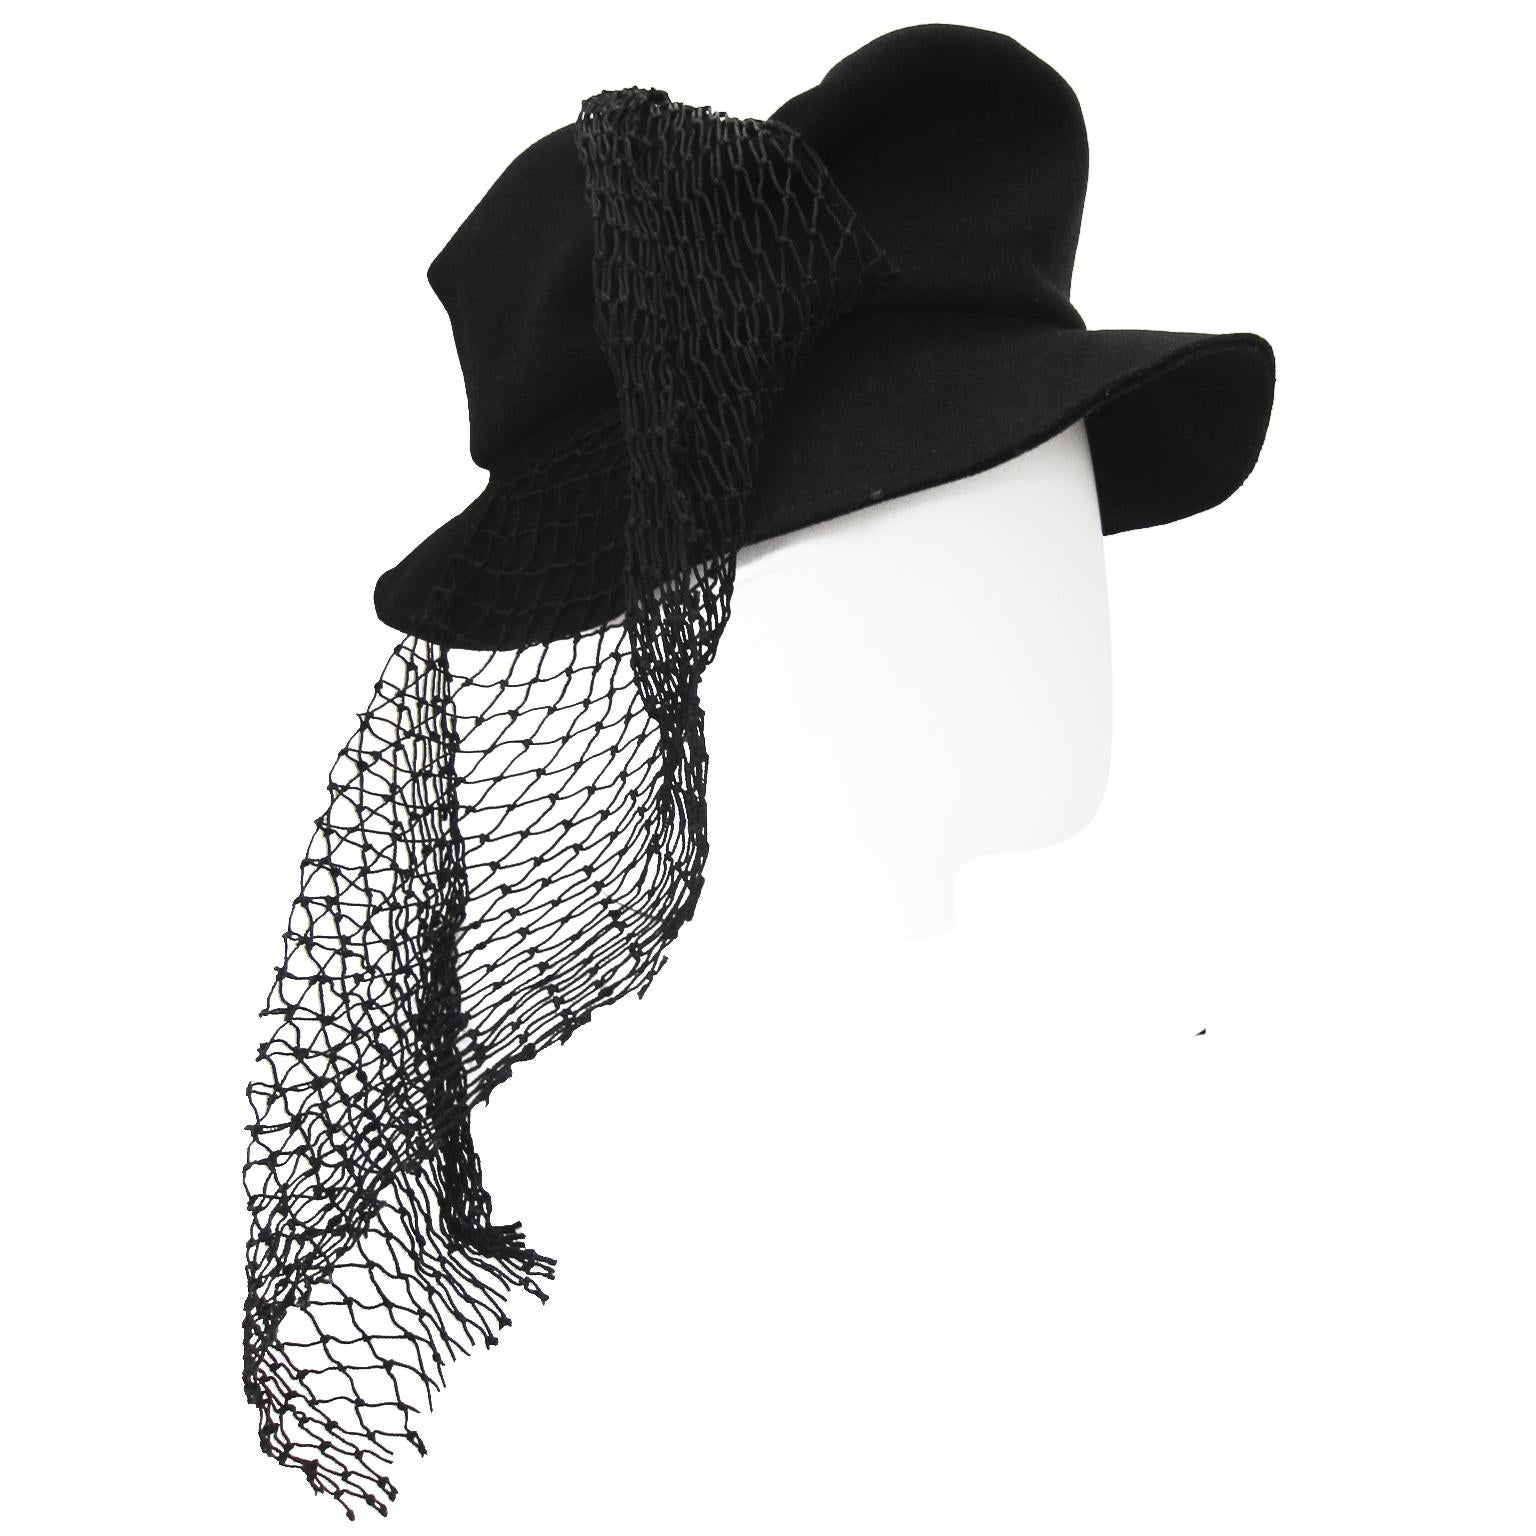 Rare Yohji Yamamoto black hat from circa SS 1999.
The hat is in black thin wool with a flat top, asymmetric draped mesh net material. Truly amazing piece. 
Inside hat measures : circa 59 cm